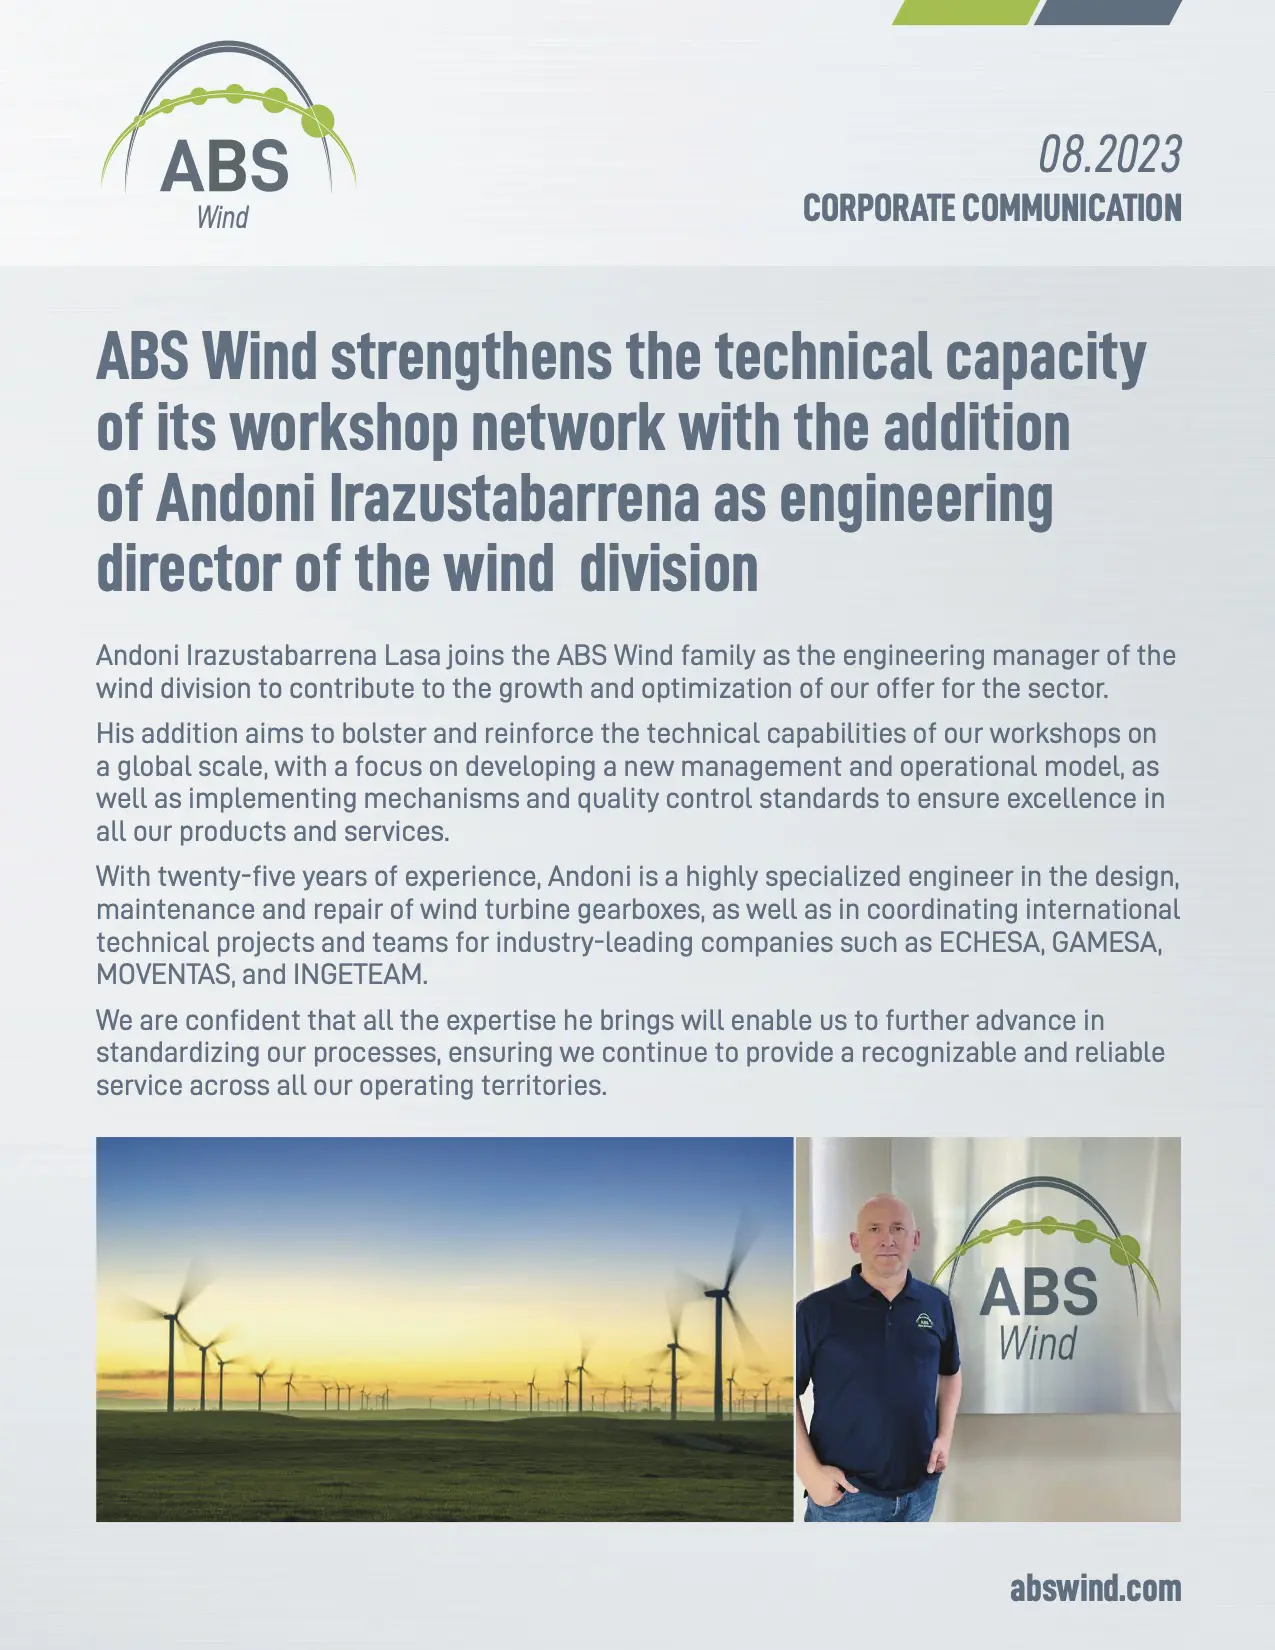 ABS WIND Andoni Irazustabarrena engineering director of the wind division